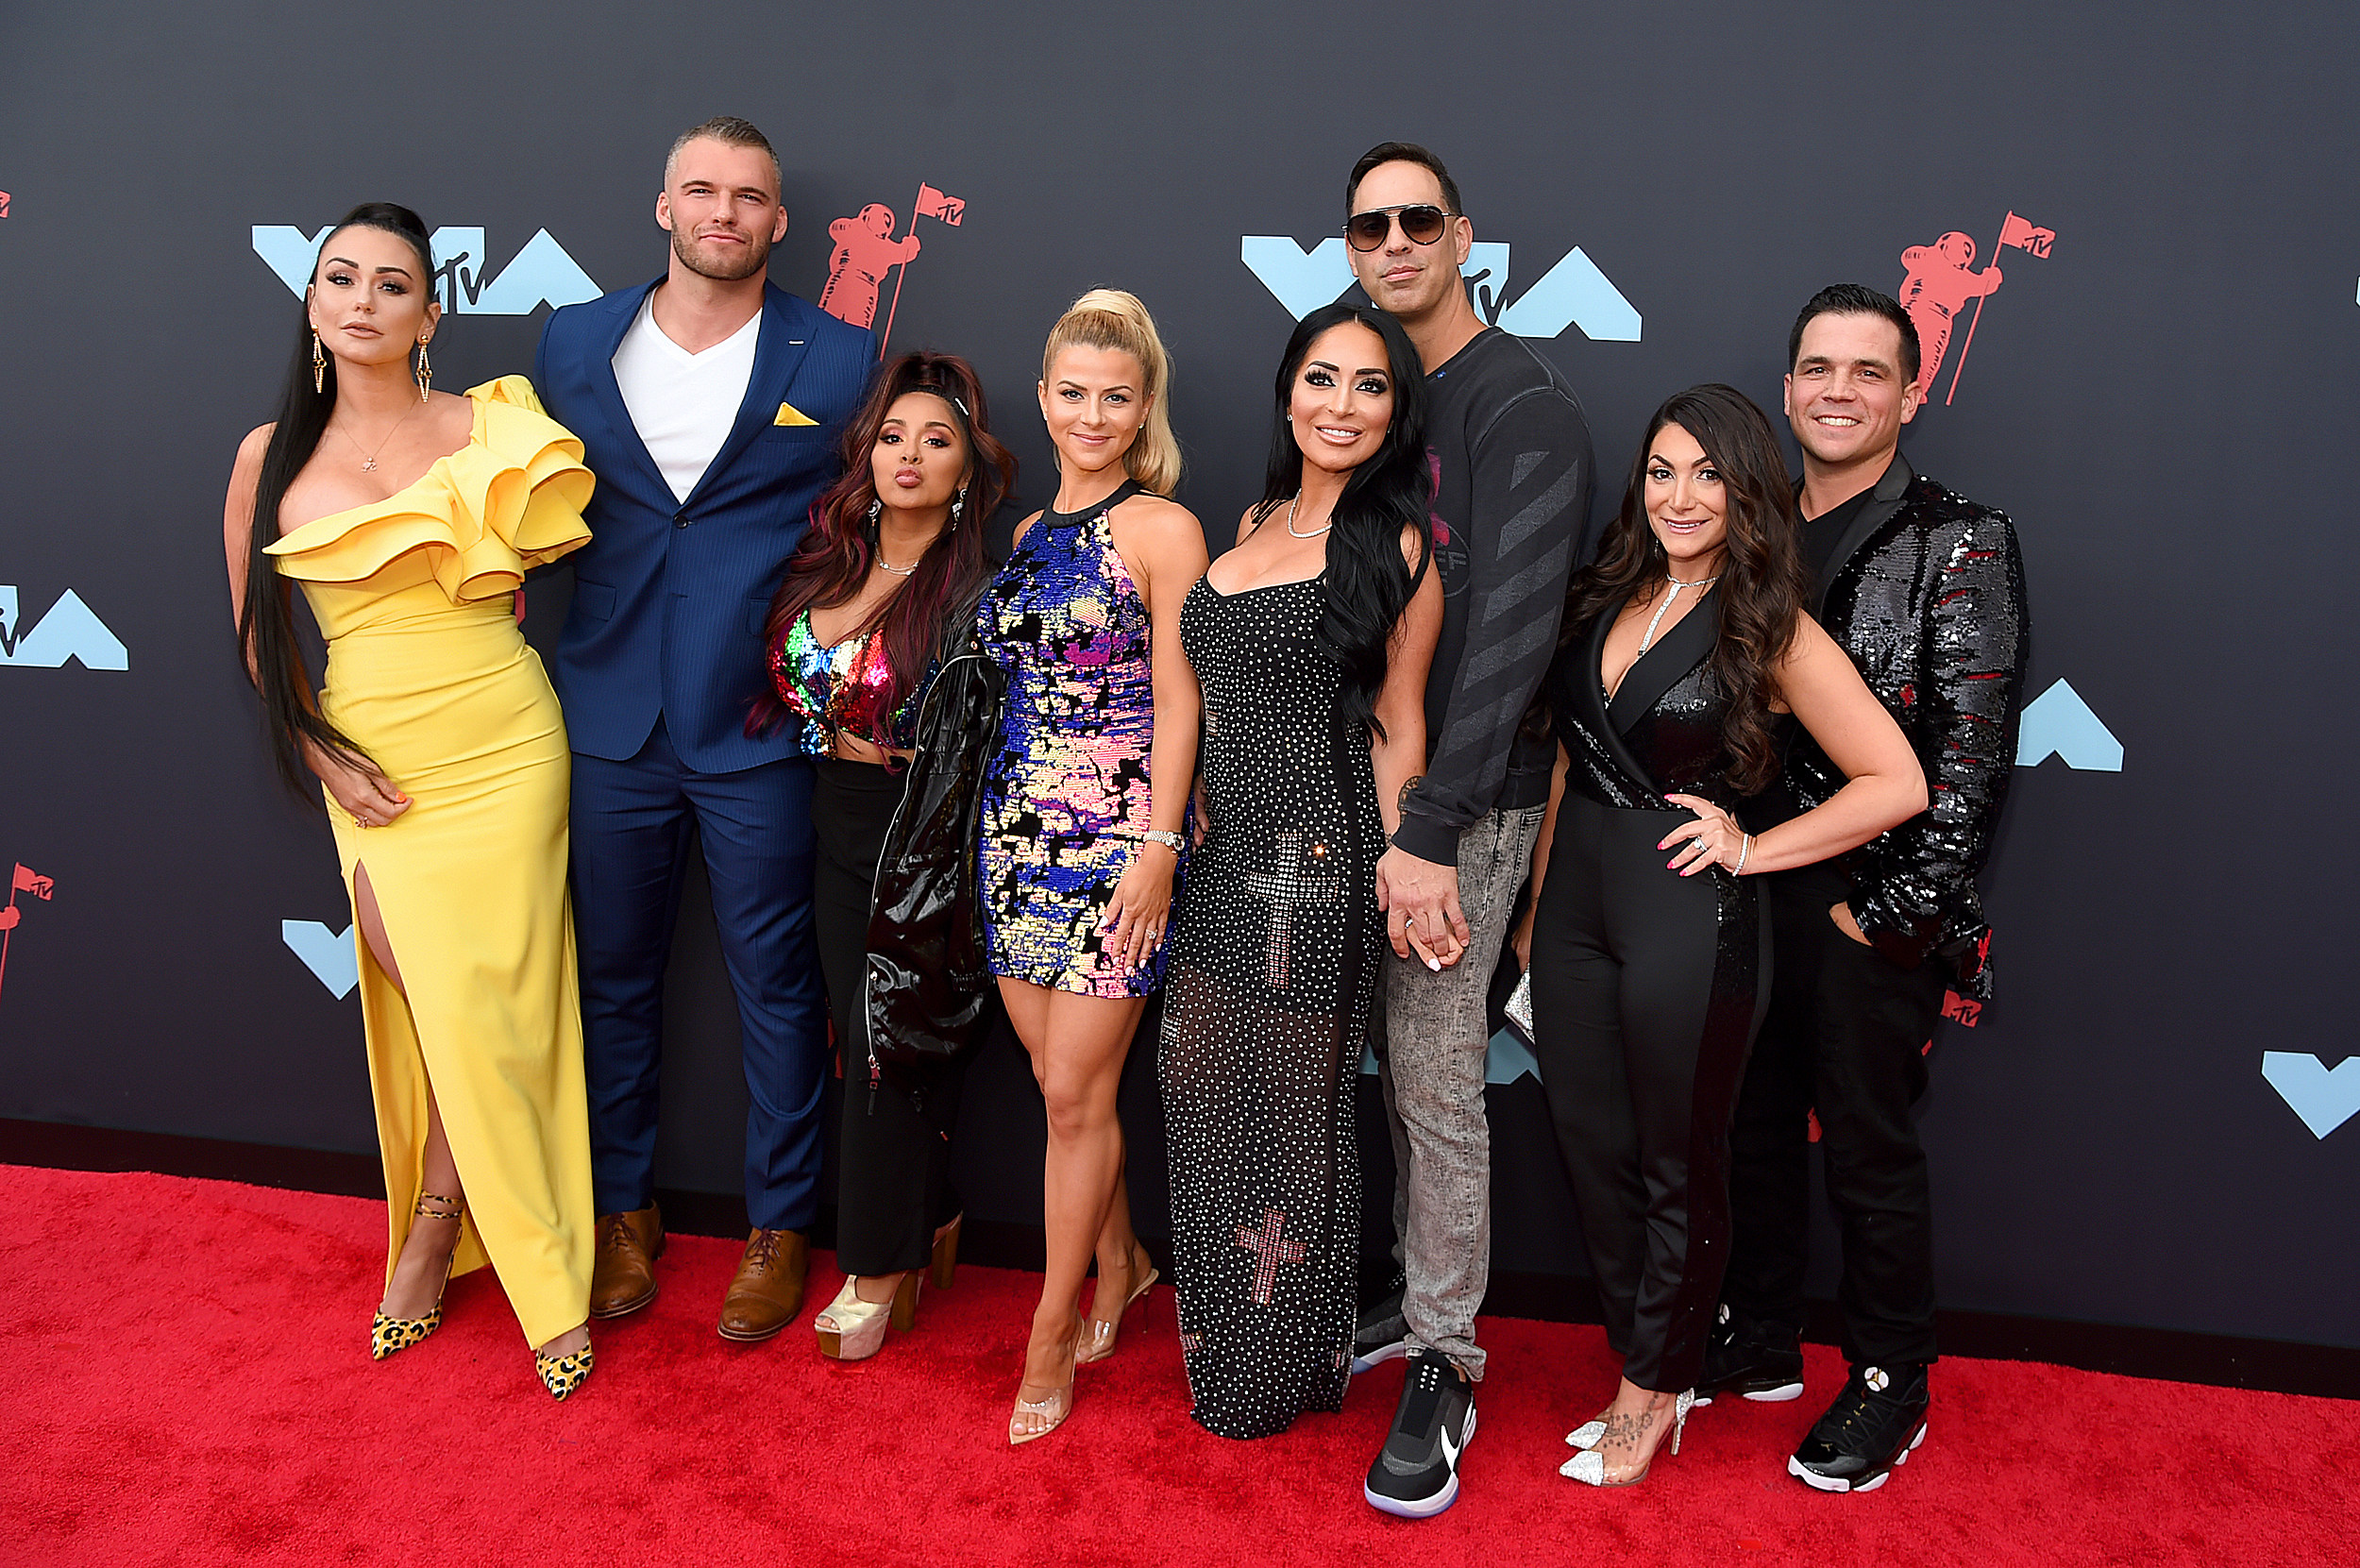 Jersey Shore' premiered 10 years ago on MTV. Here's why the global